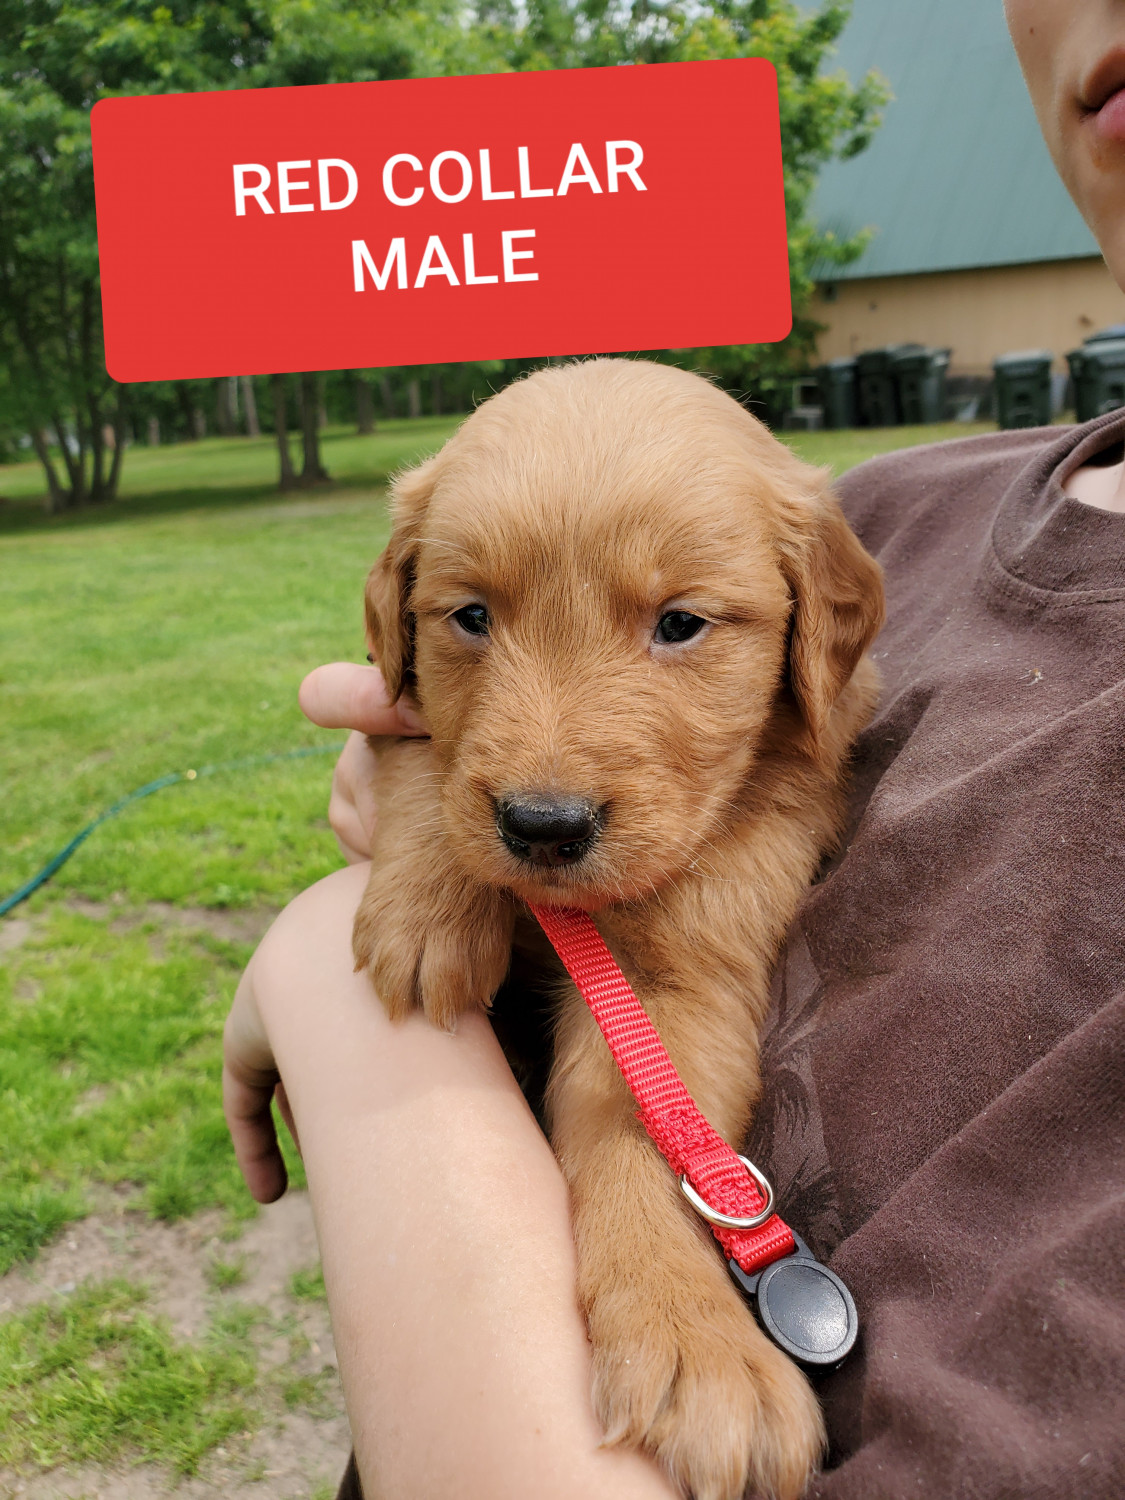 60 HQ Photos Golden Retriever Puppies For Sale In Mn / Golden Retriever Puppies For Sale | Pine River, MN #300350